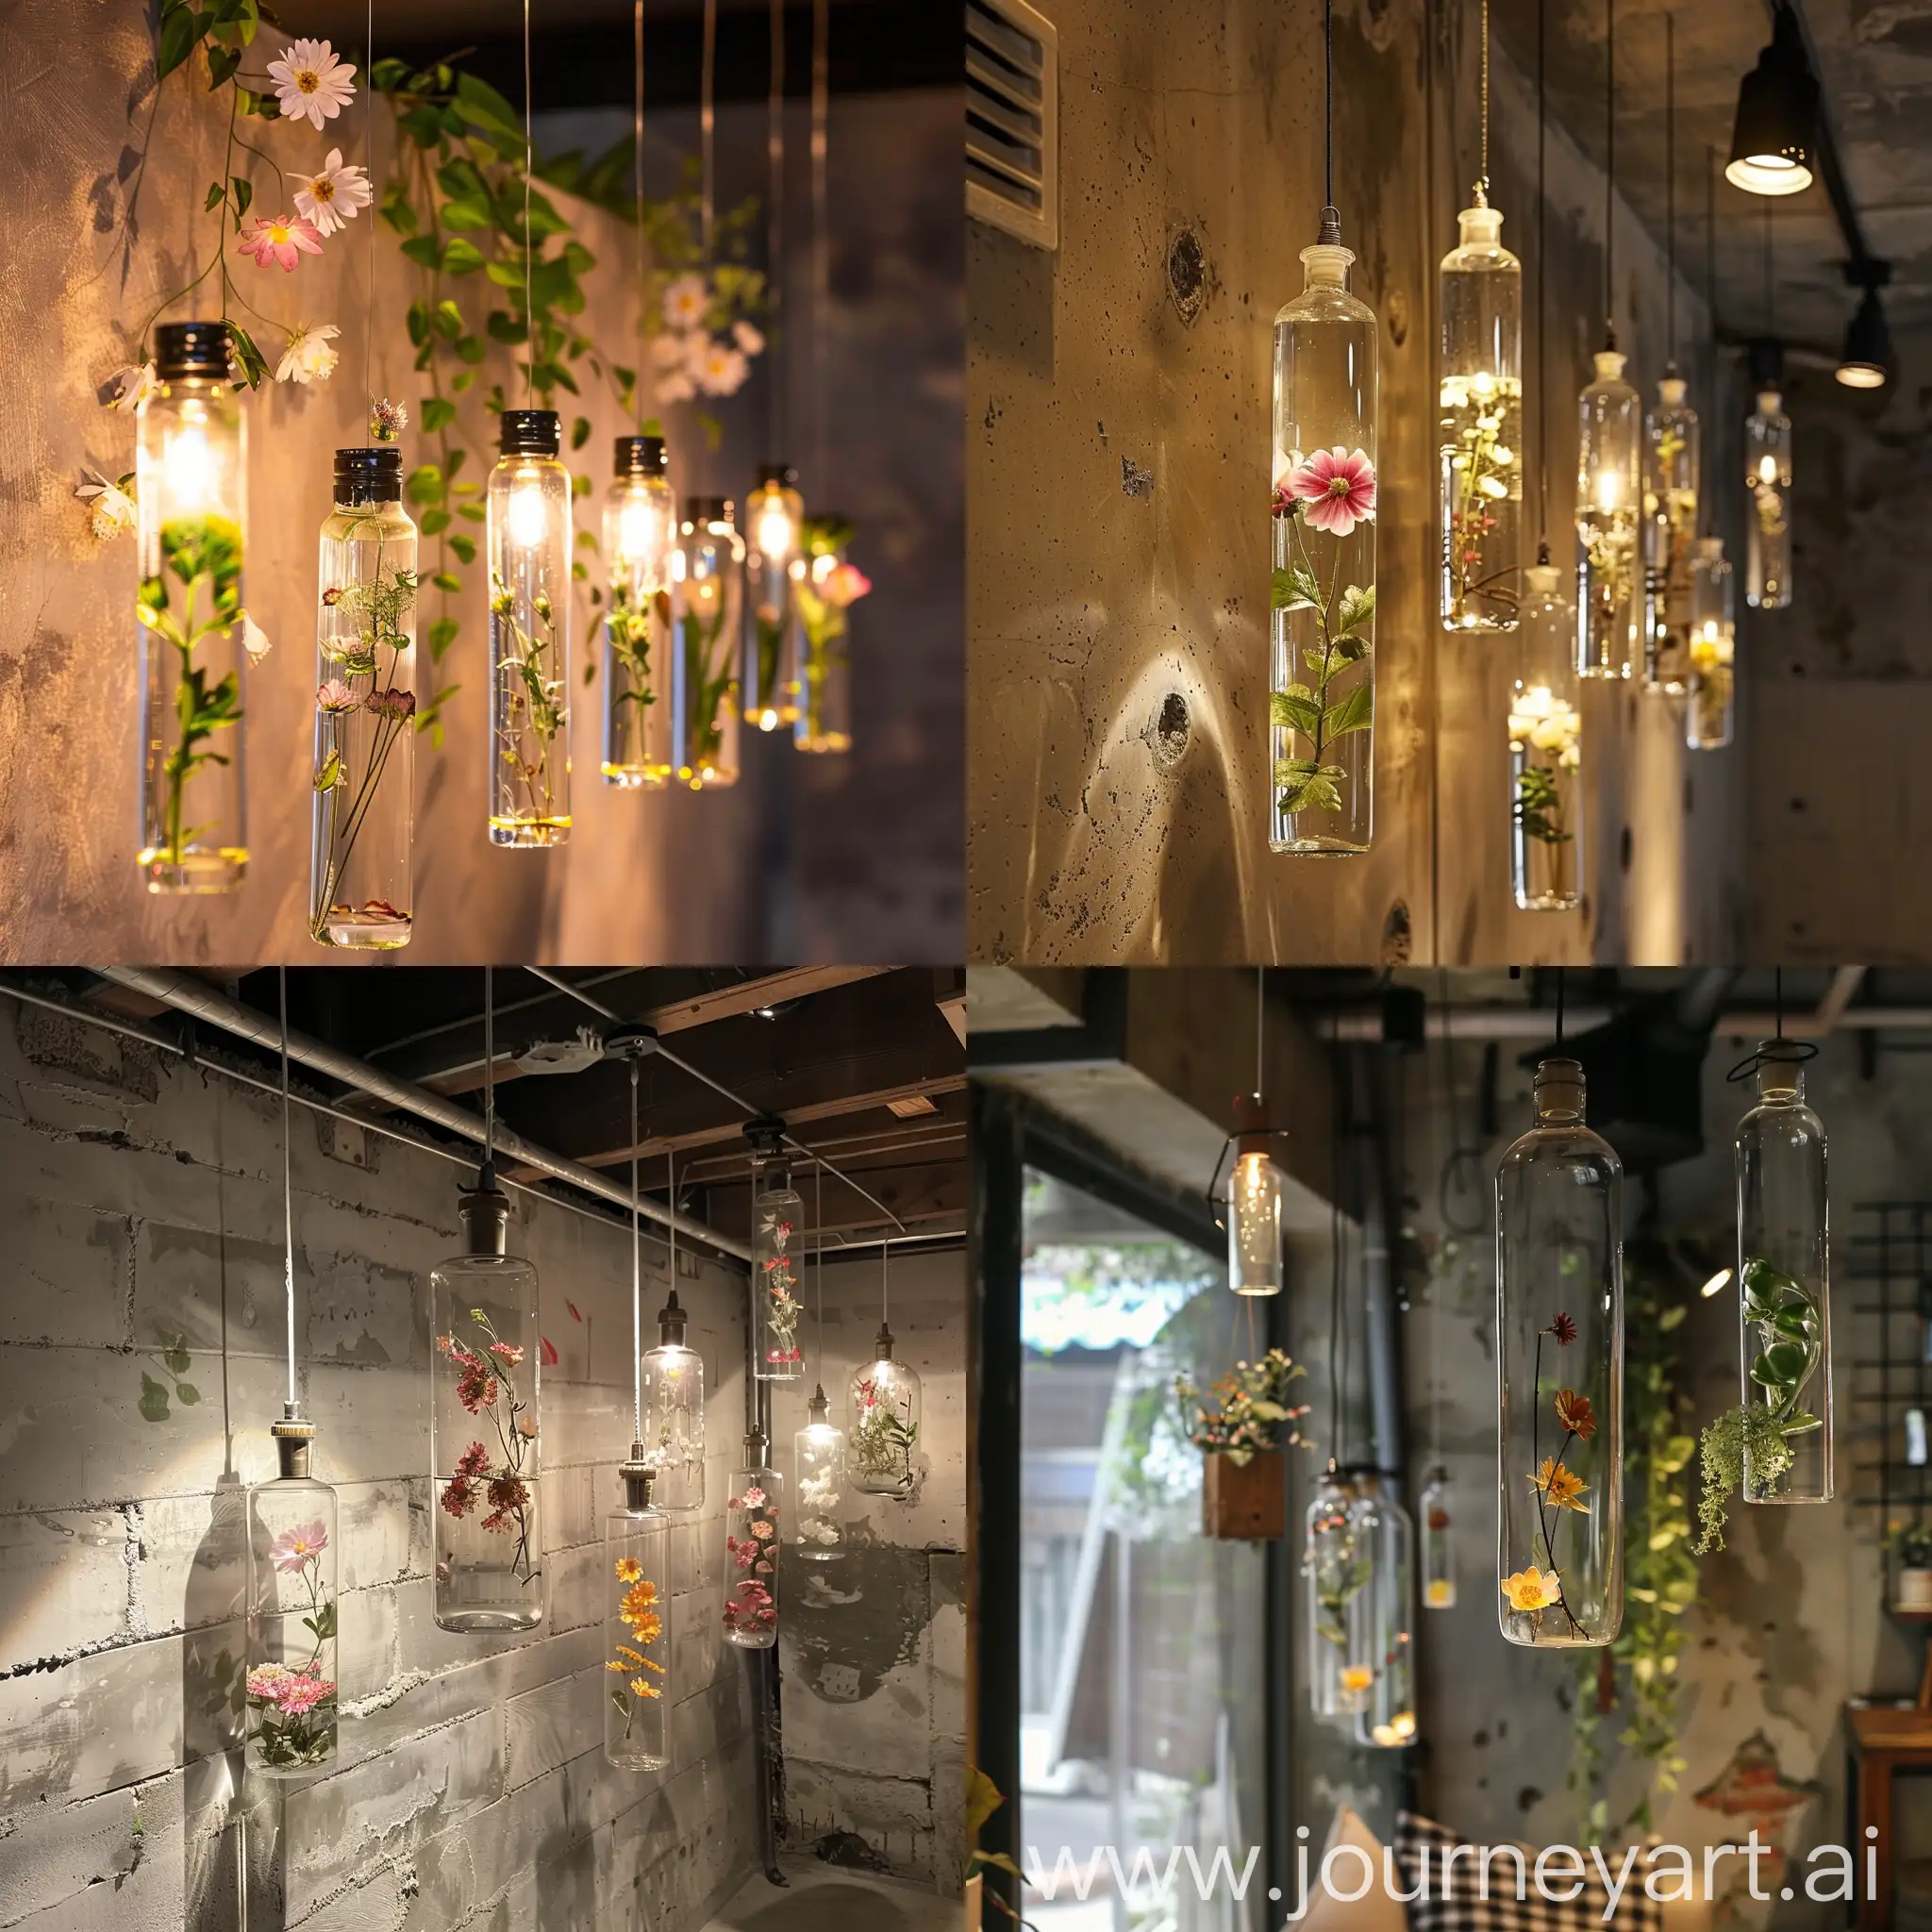 Elegant-Basement-Wall-Decor-with-Transparent-Glass-Bottles-and-Daytime-Elements